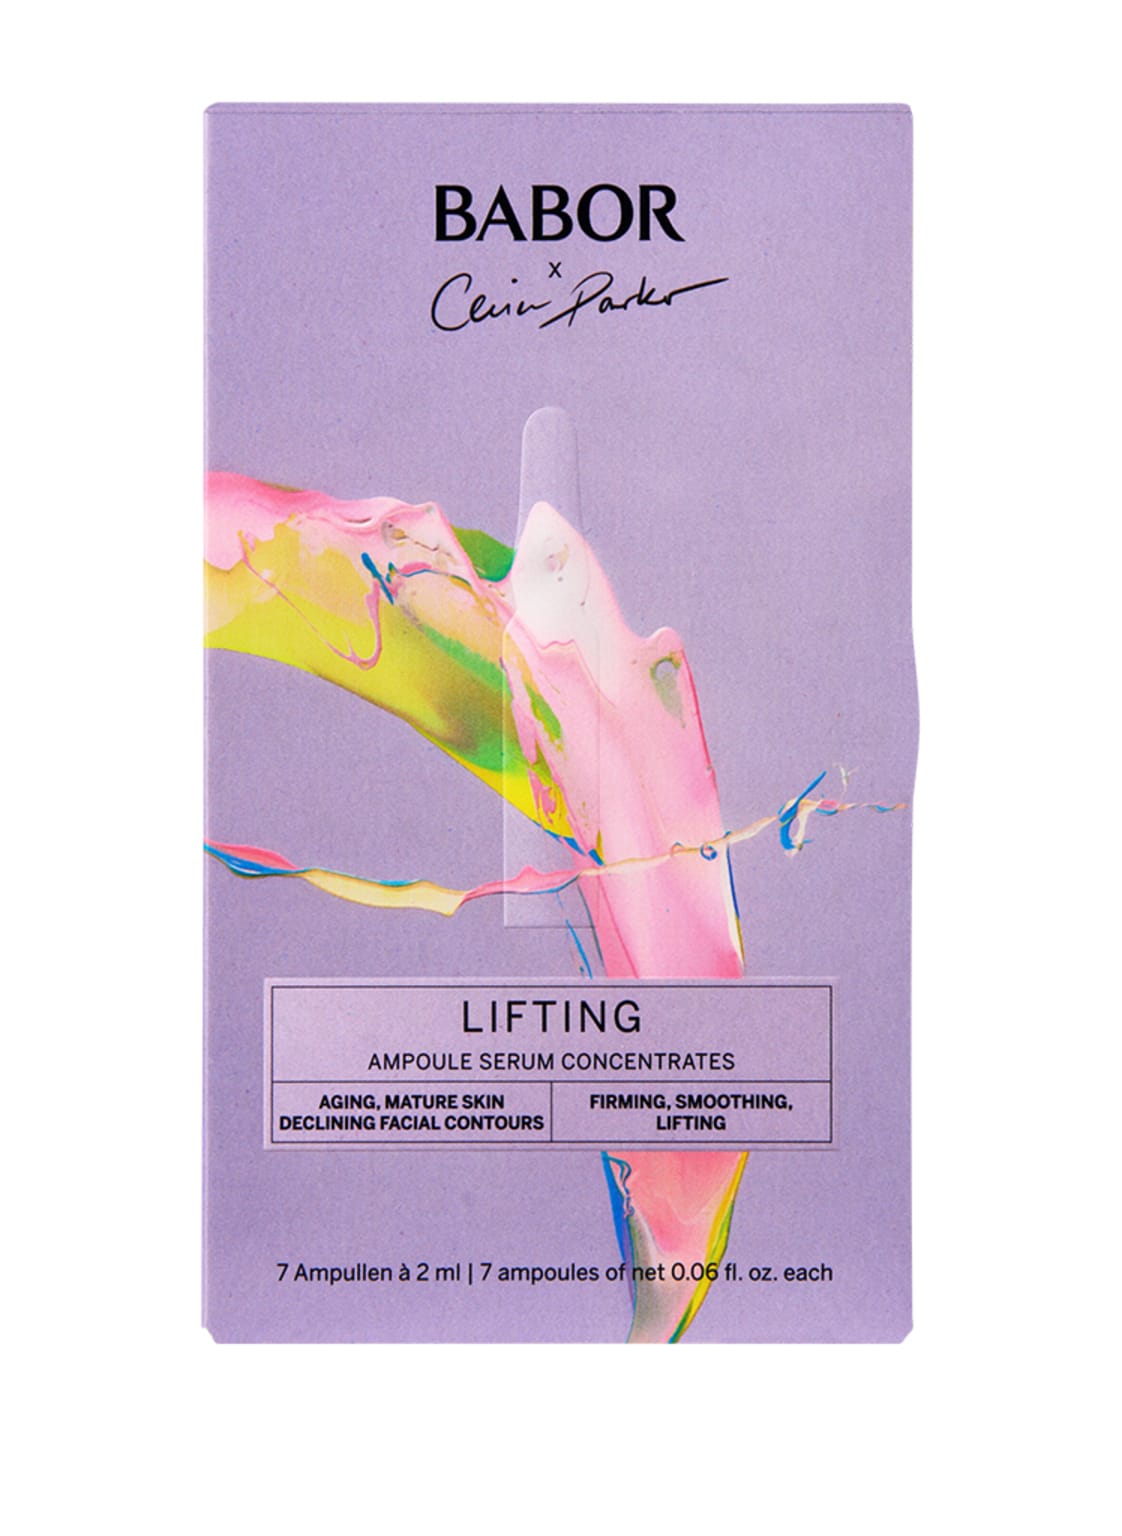 Babor Ampoule Concentrates Lifting Ampullen (7 x 2 ml) 14 ml von BABOR